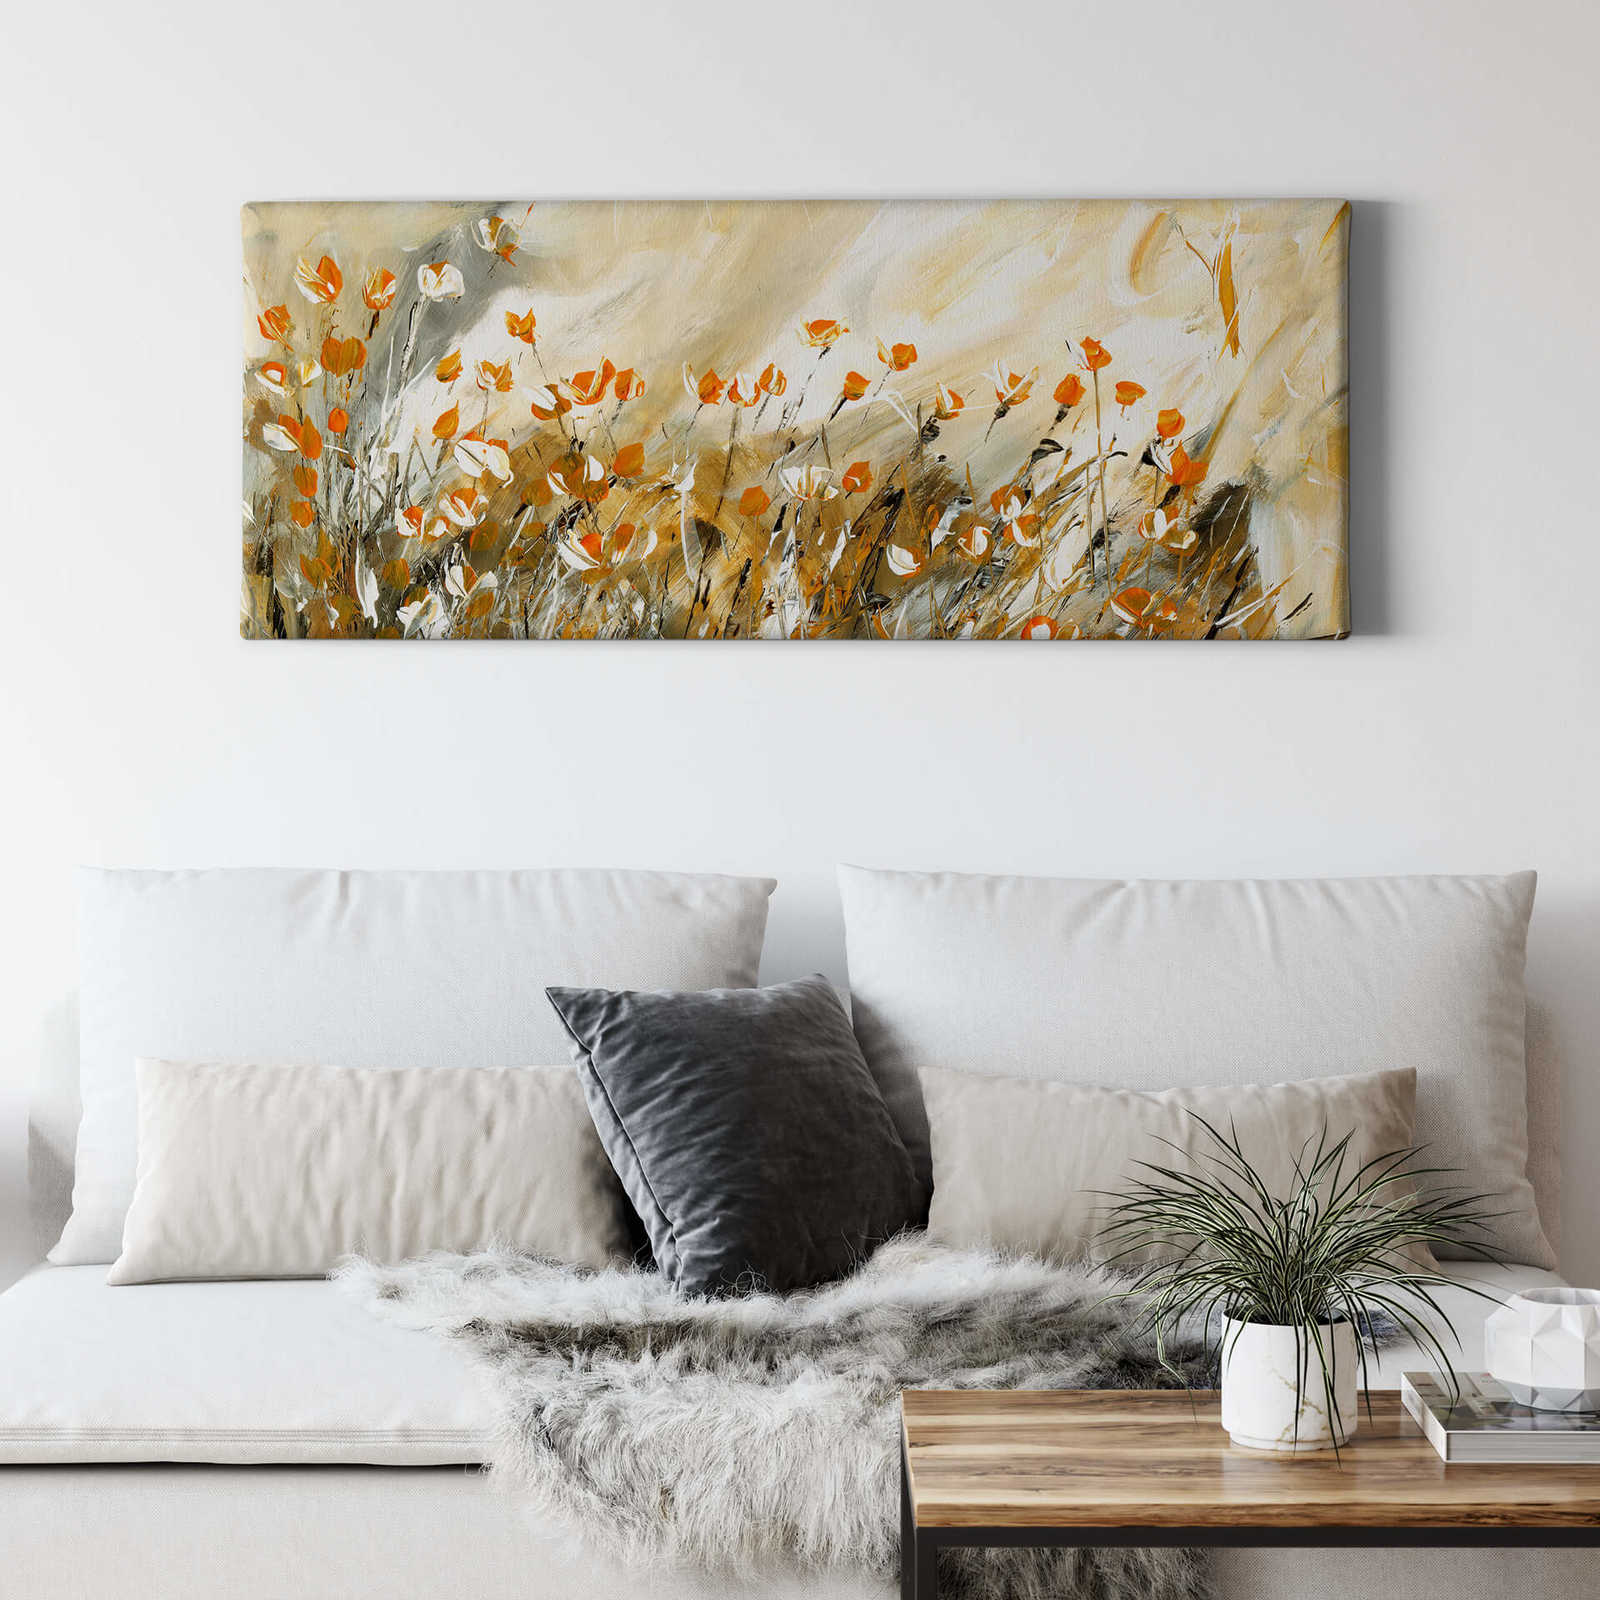             Panorama canvas painting golden flower meadow by Kiksic
        